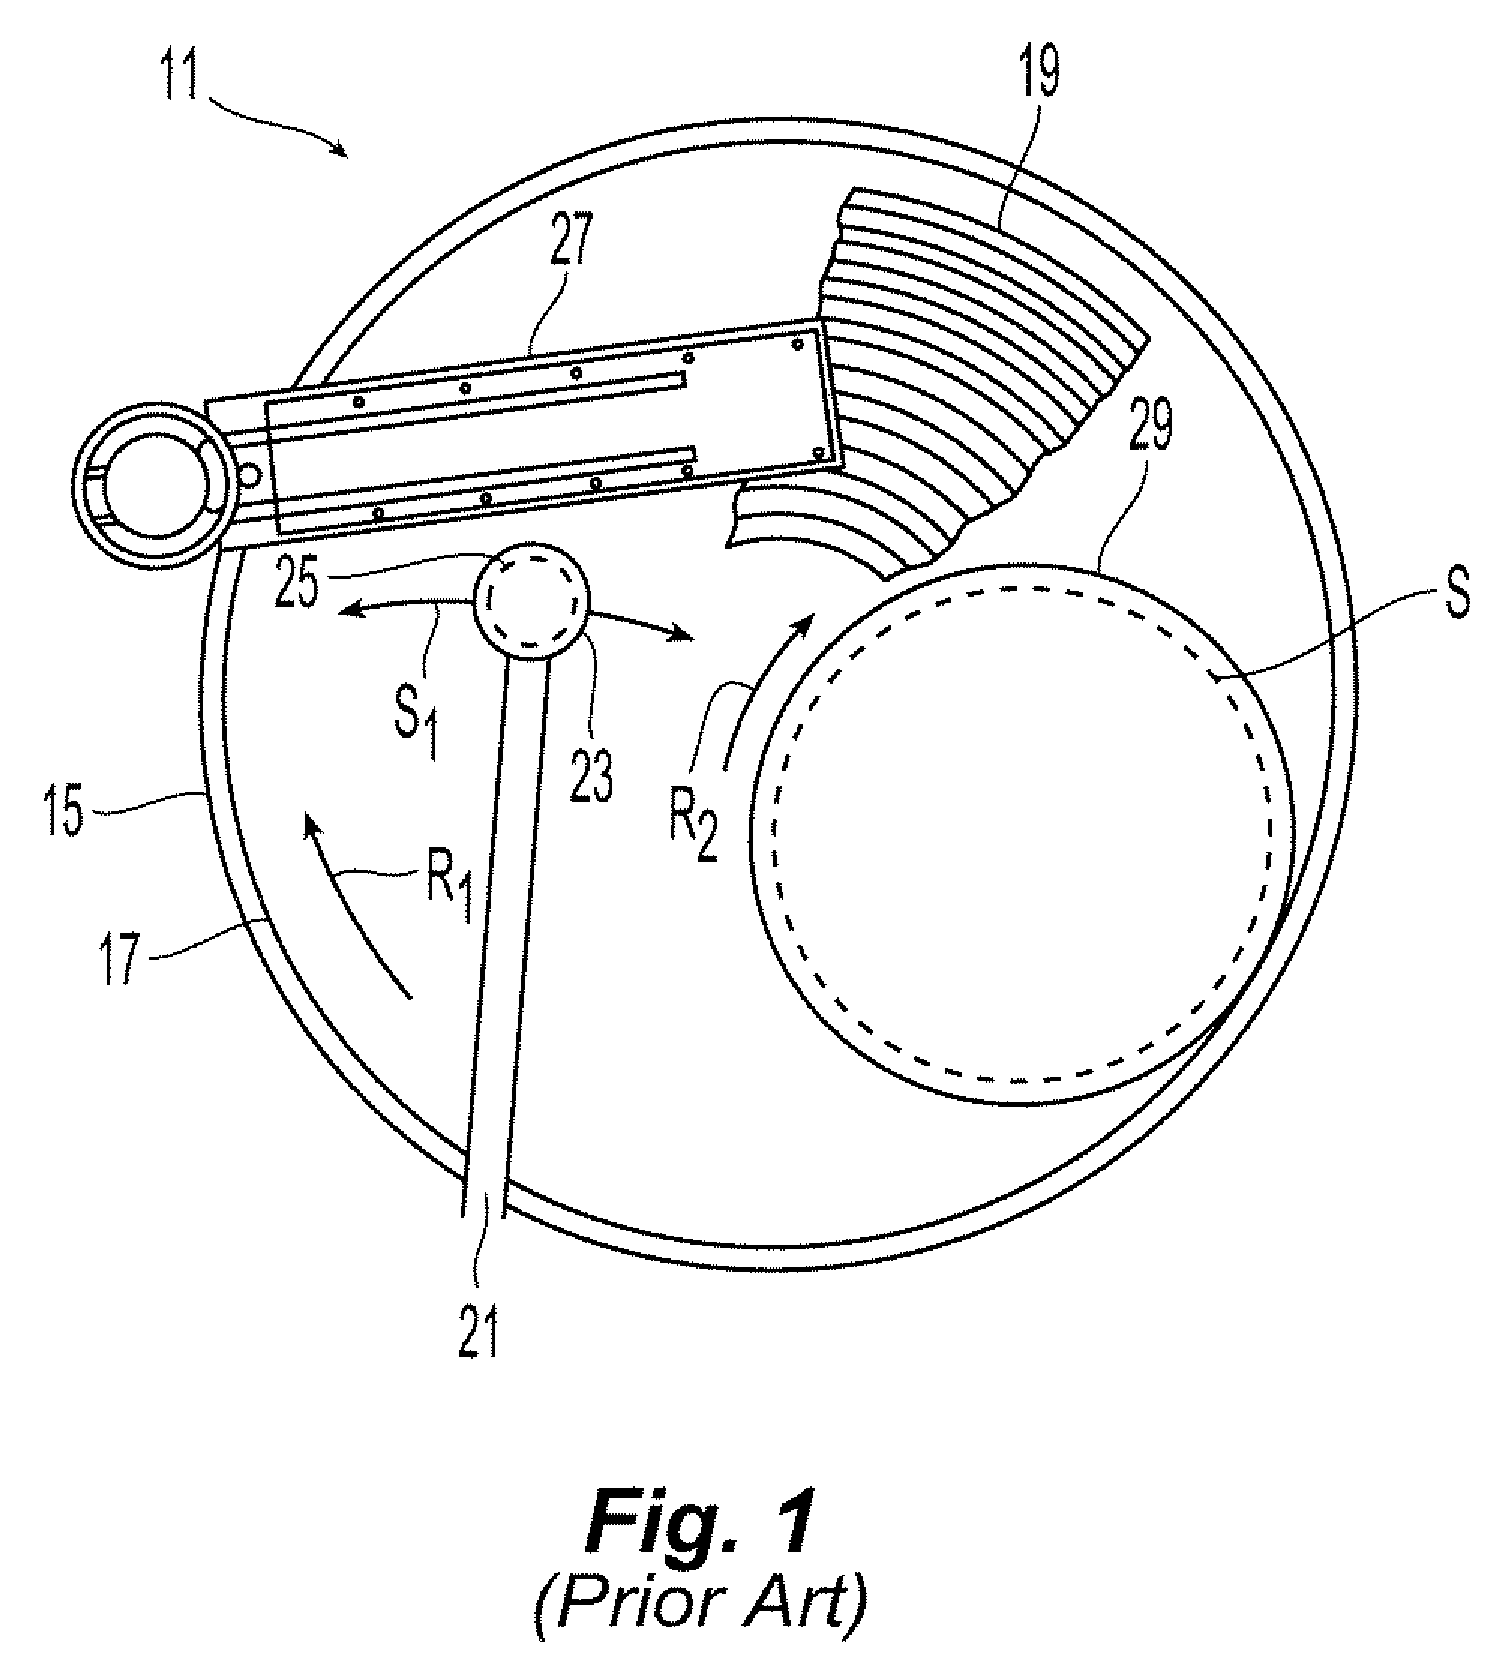 Copper cmp polishing pad cleaning composition comprising of amidoxime compounds